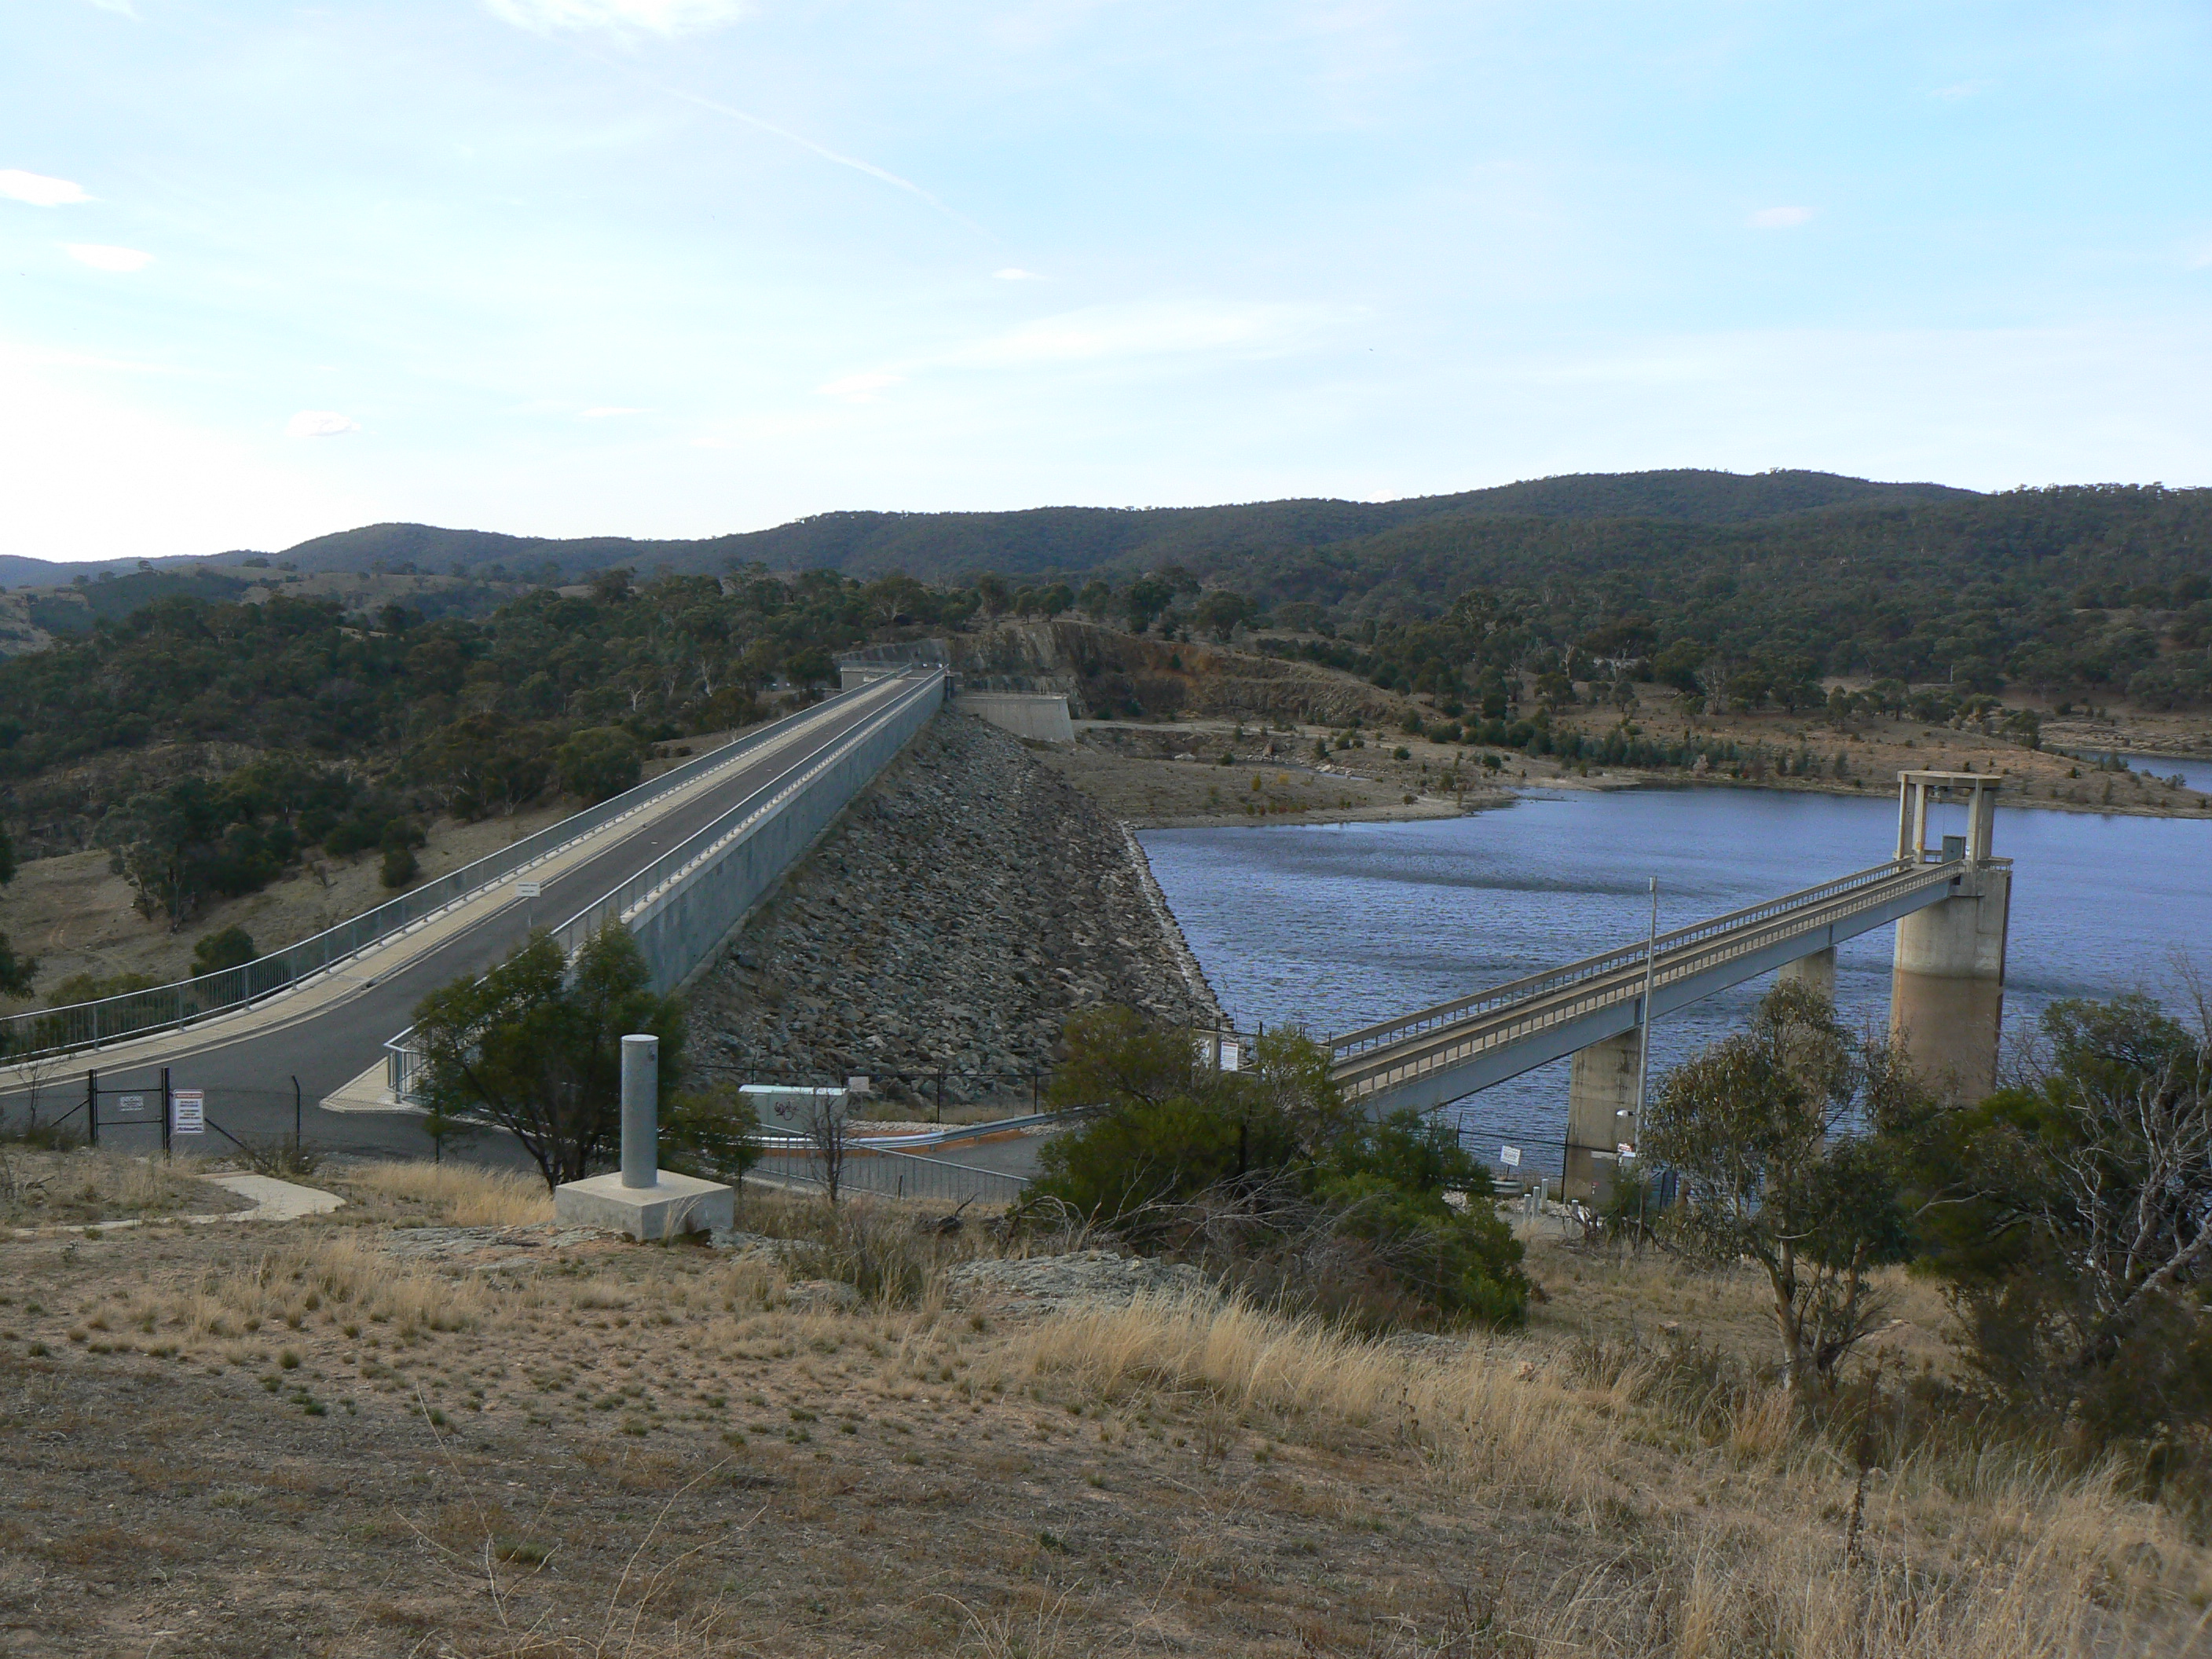 The dam, as seen from the dam-side carpark